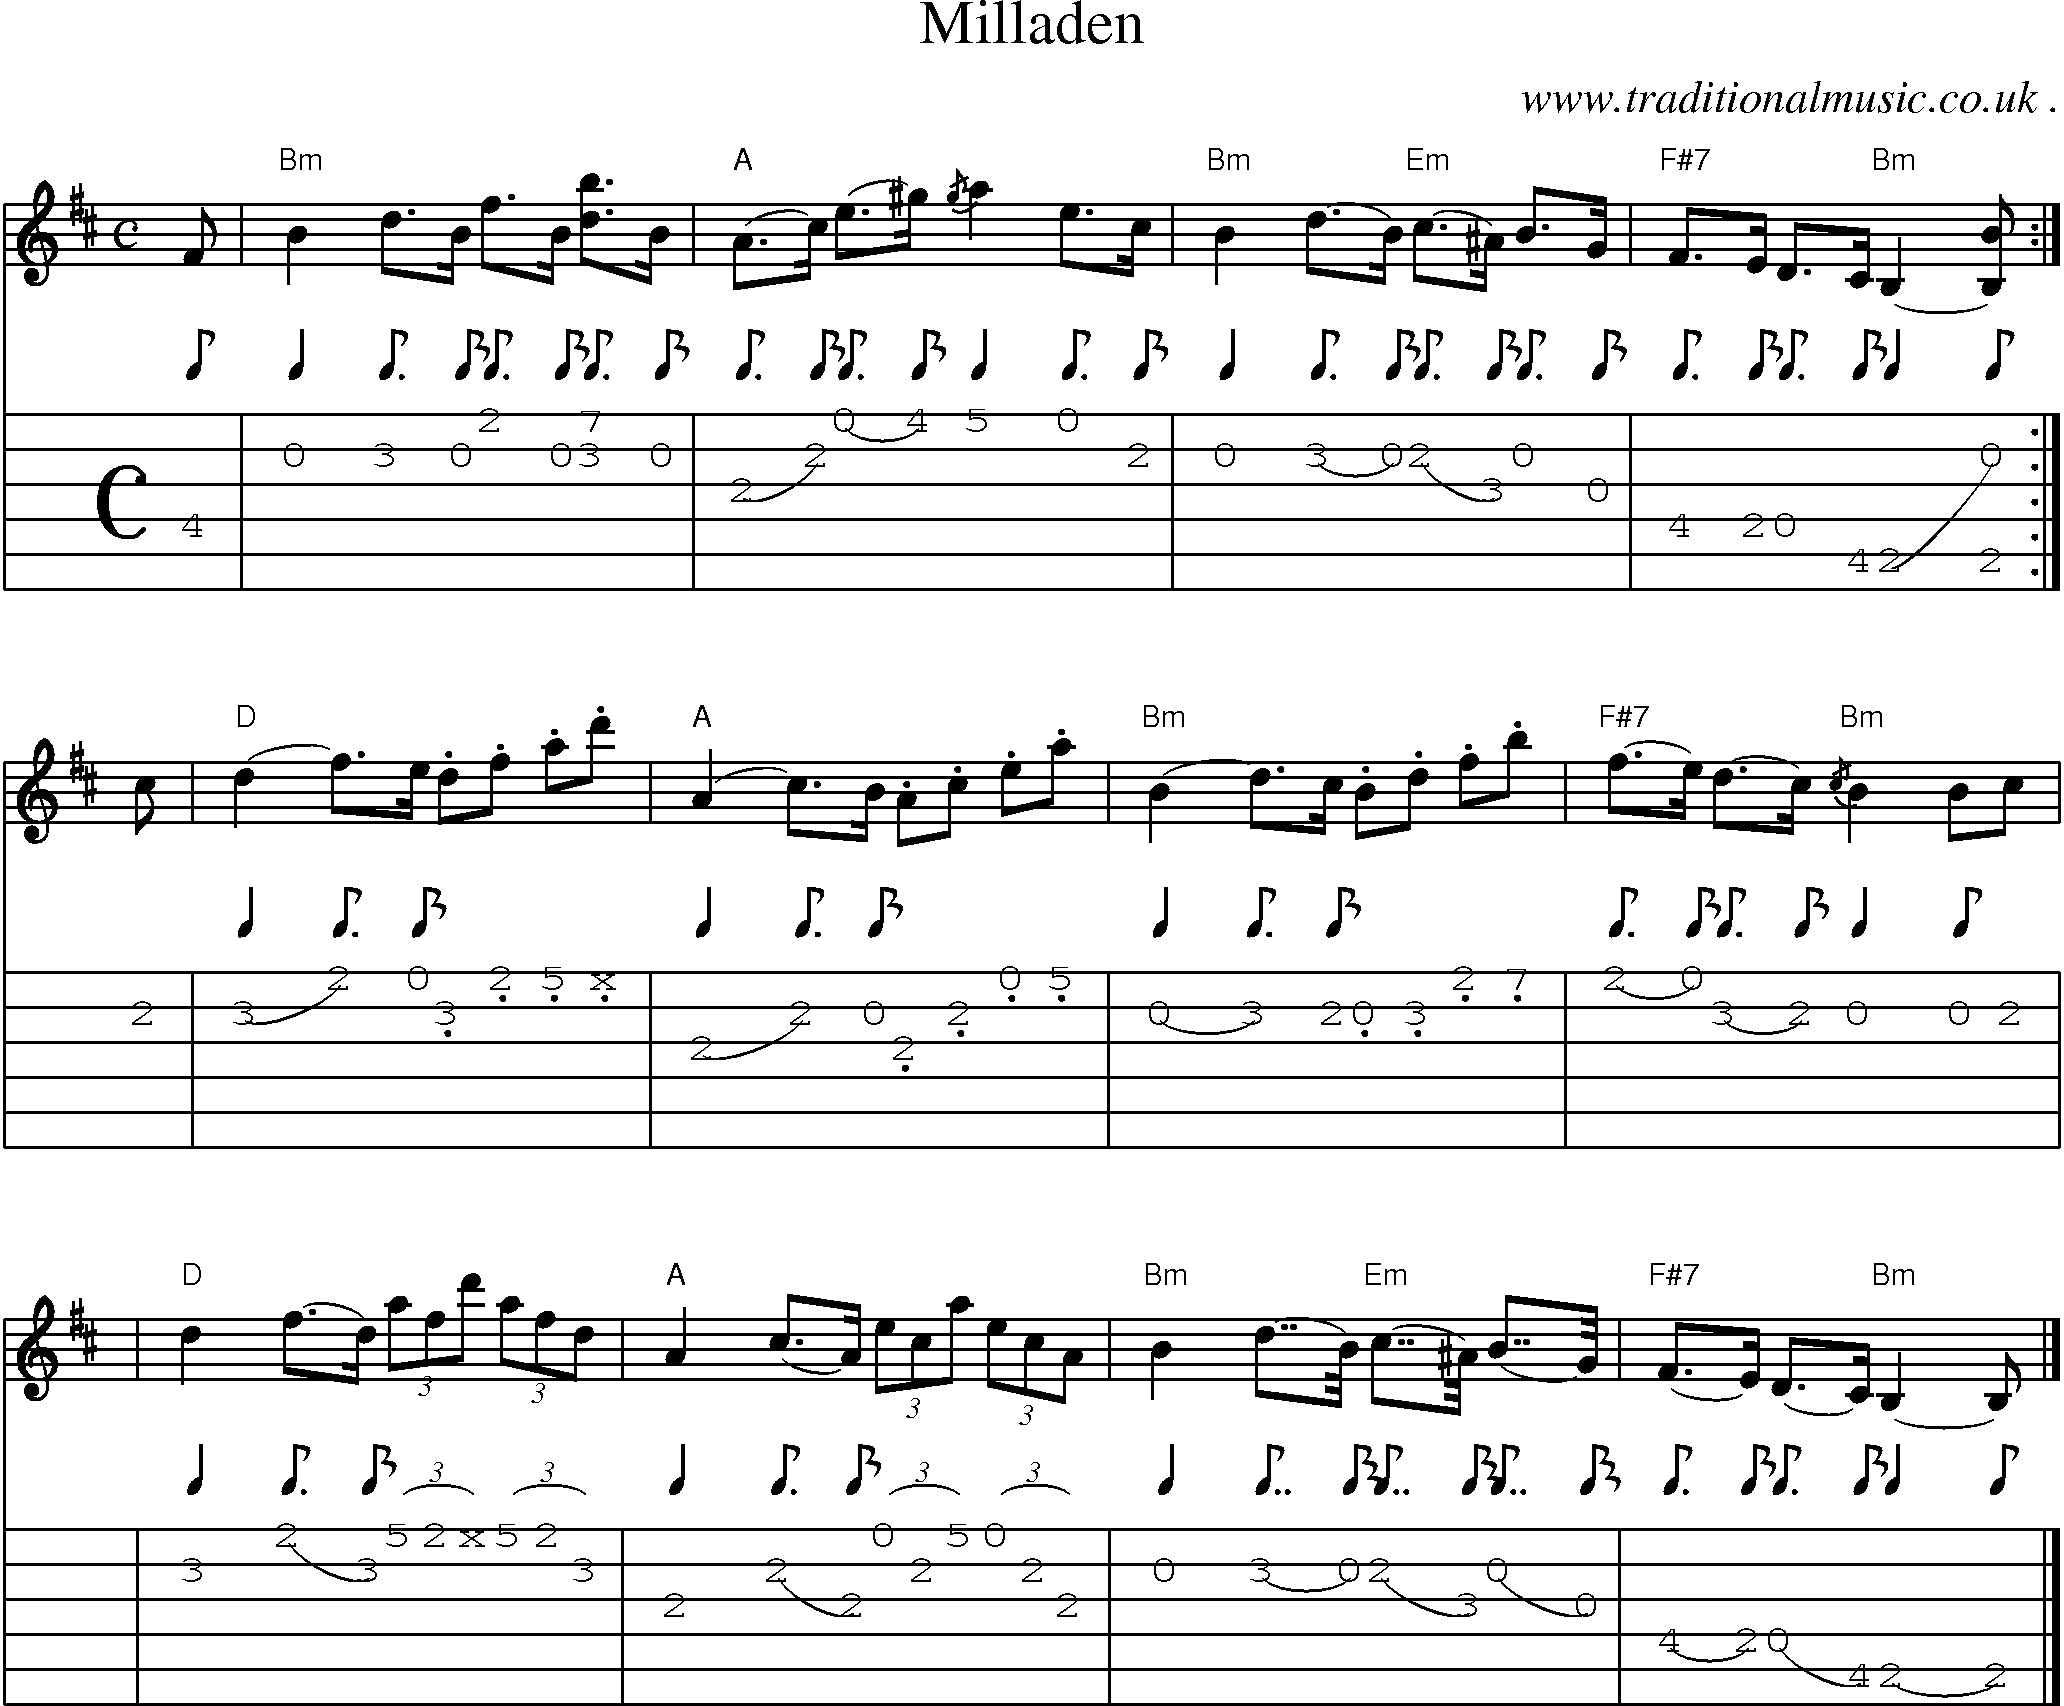 Sheet-music  score, Chords and Guitar Tabs for Milladen